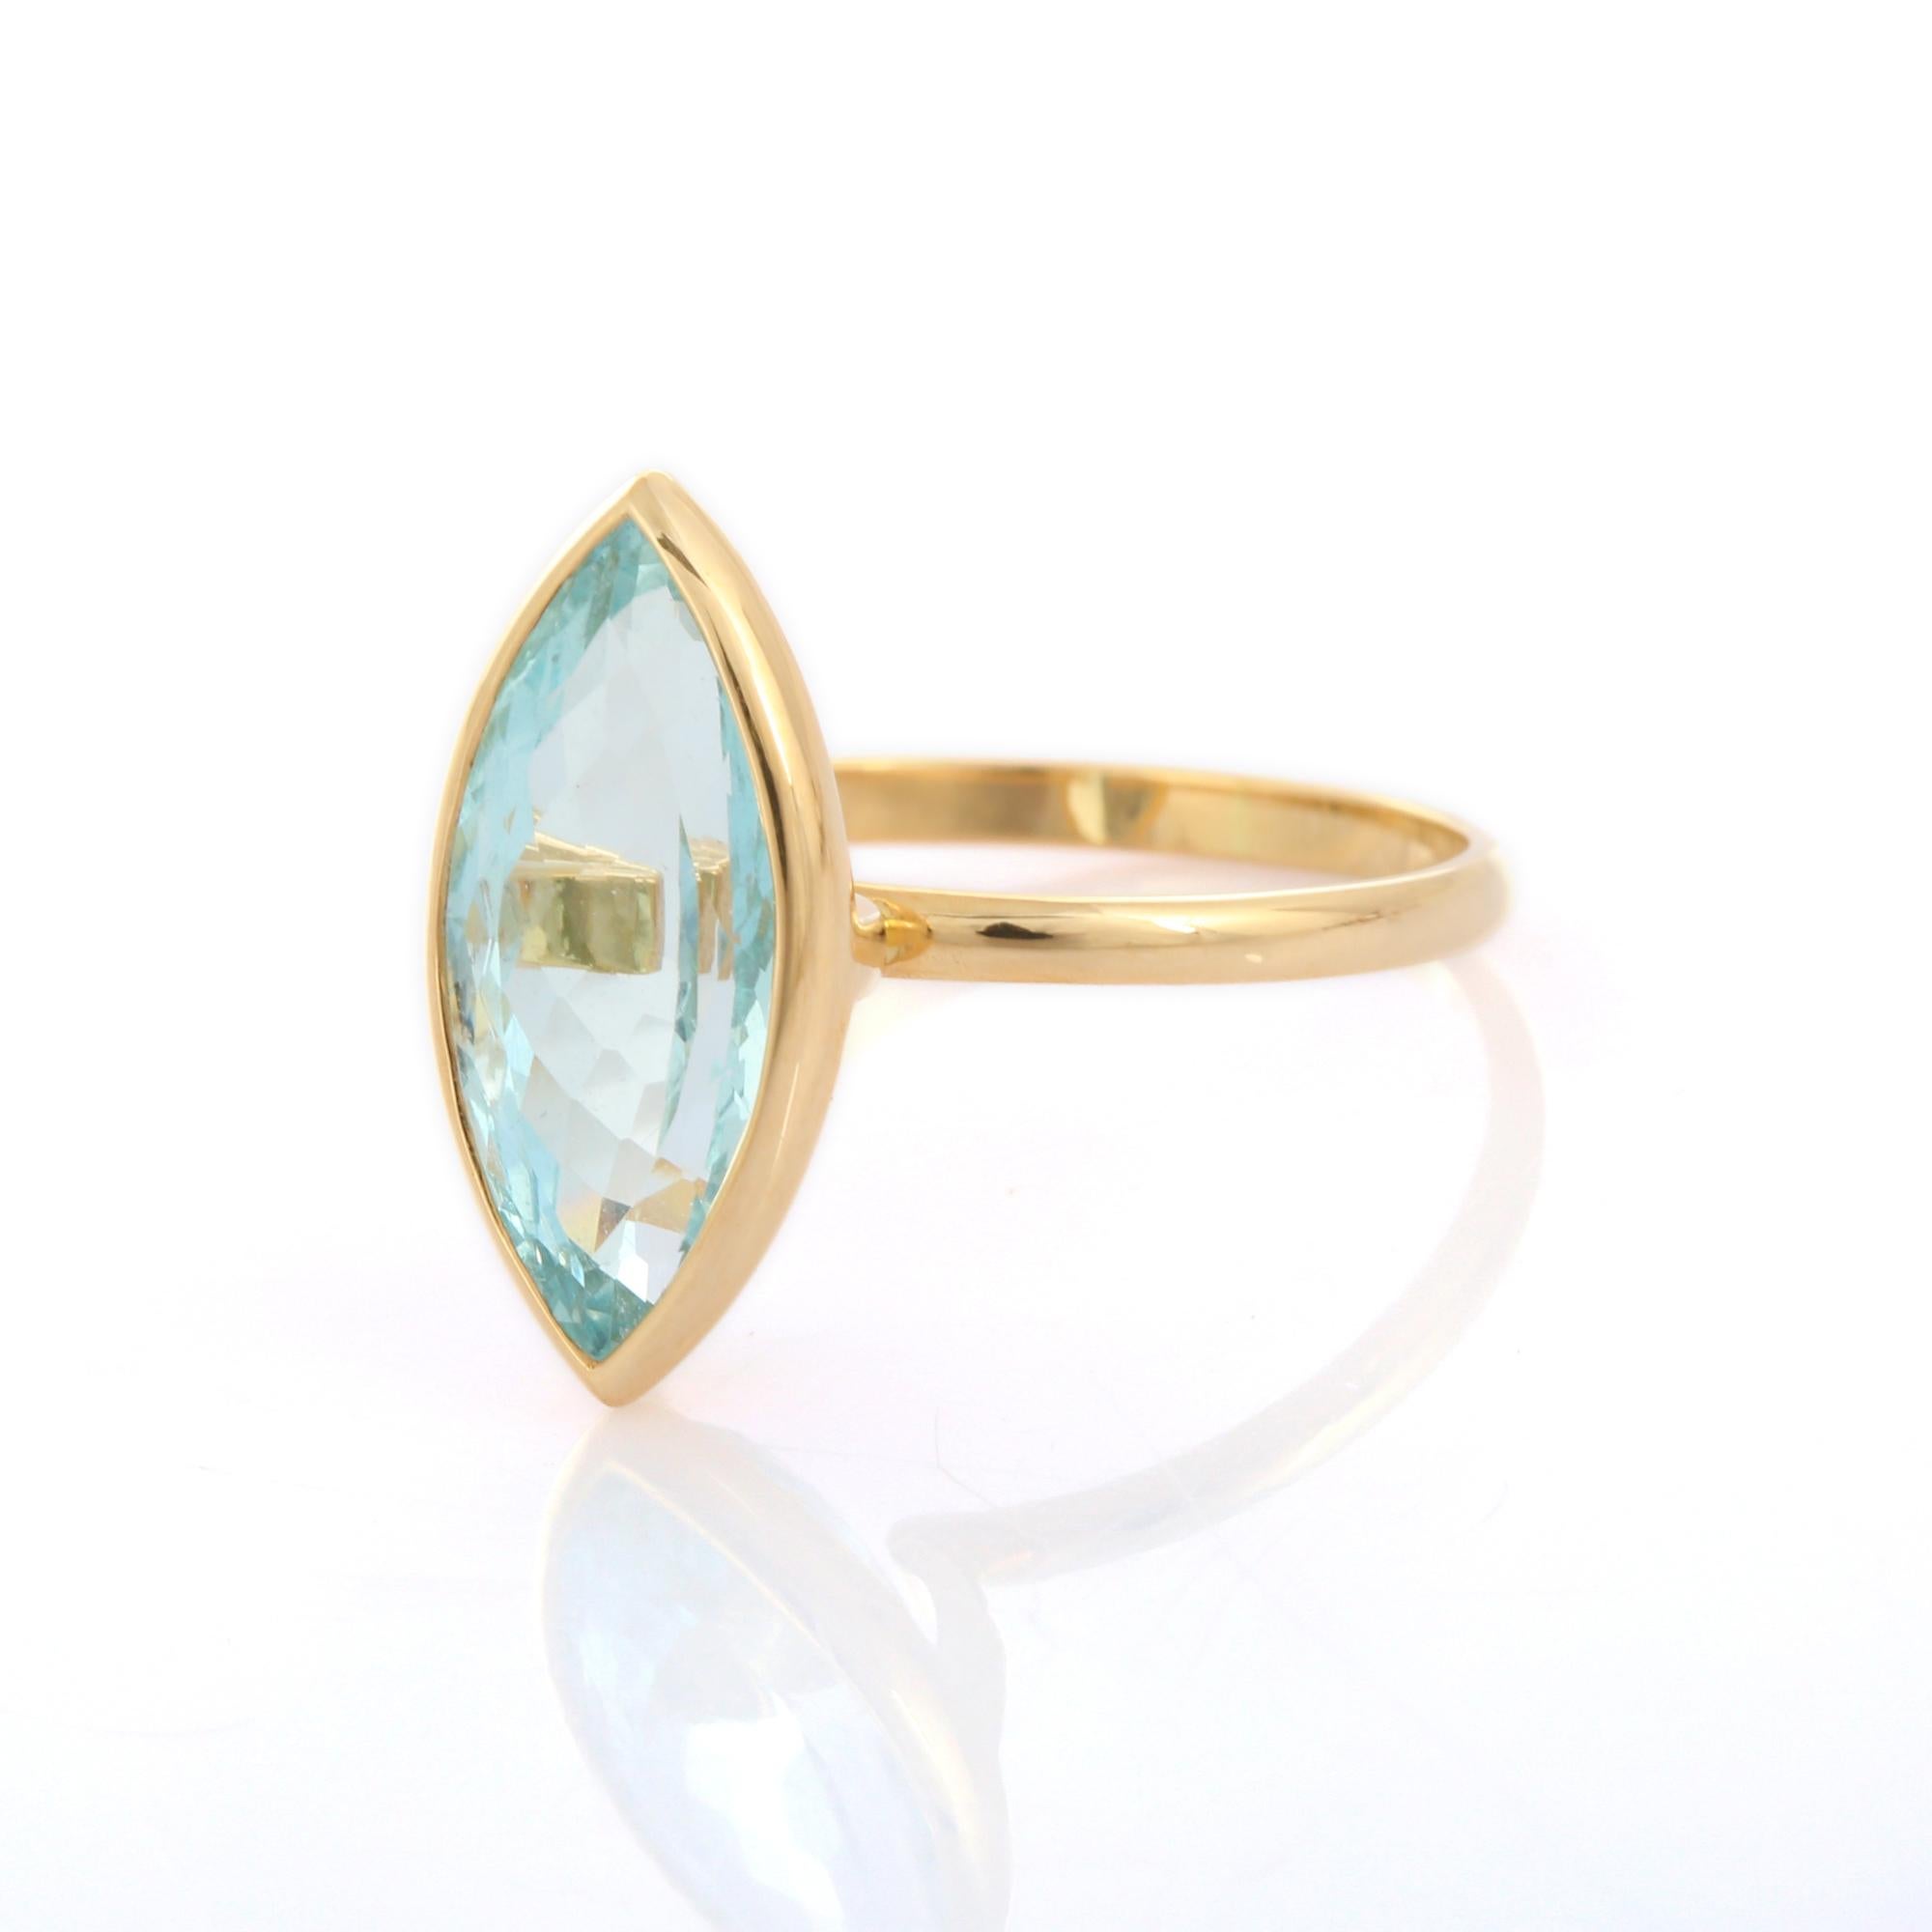 For Sale:  Marquise Cut Aquamarine Cocktail Ring in 18K Yellow Gold  4